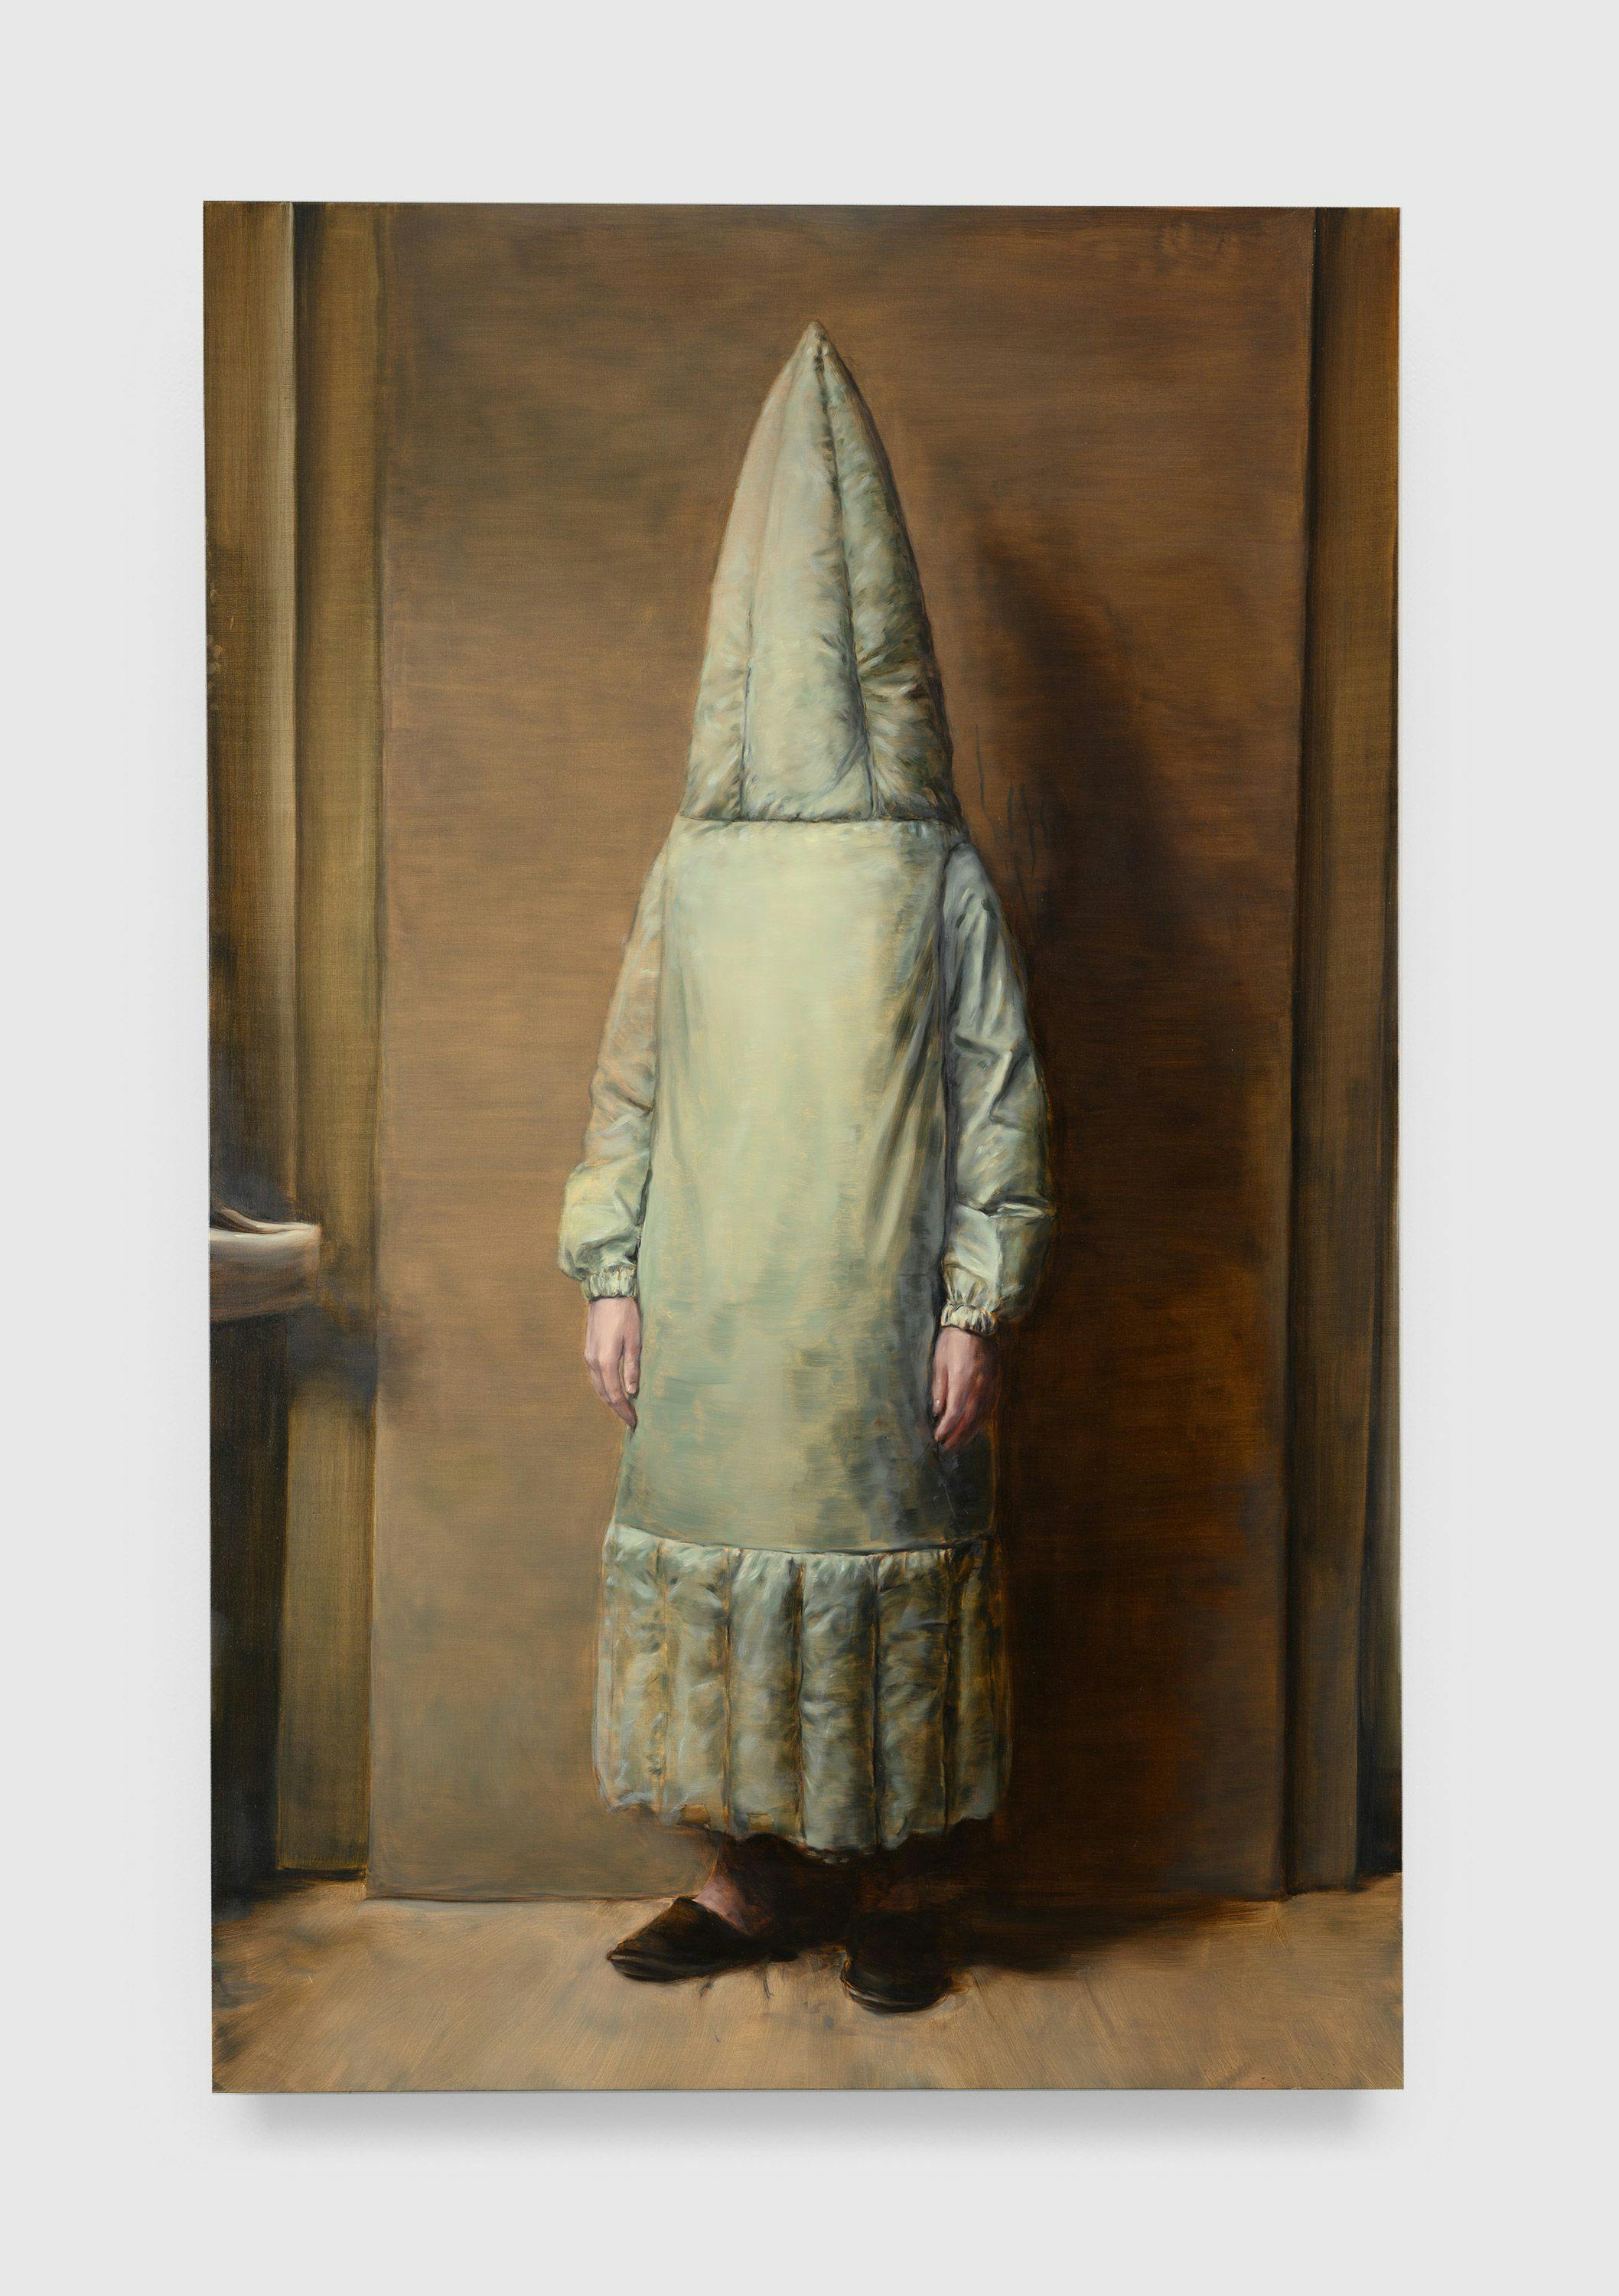 A painting by Michaël Borremans, titled Large Rocket, dated 2019.